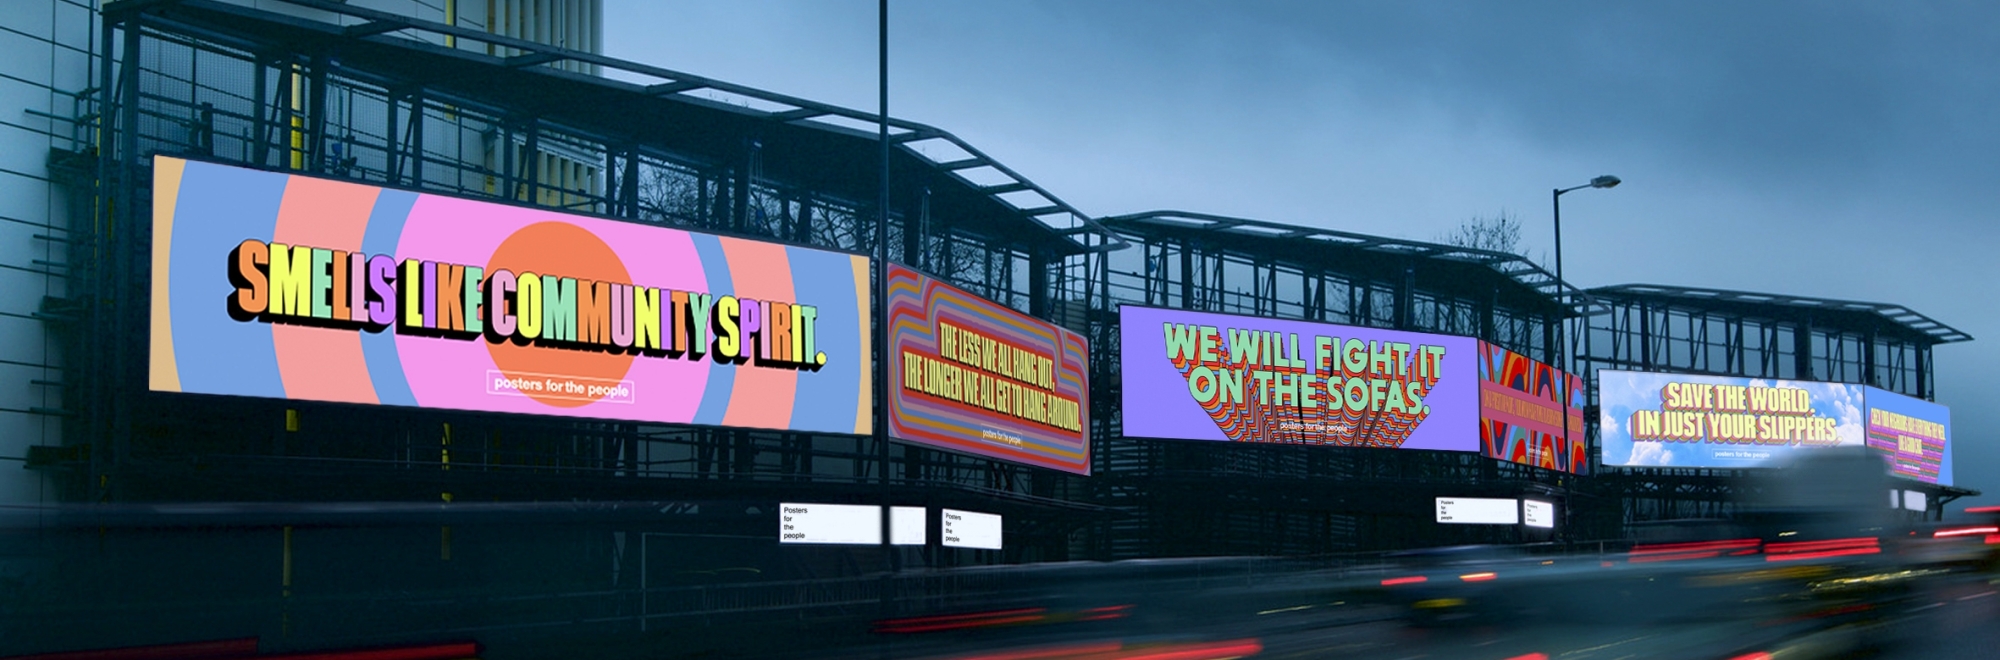 Top UK brands come together to spread positivity with Posters for the People campaign